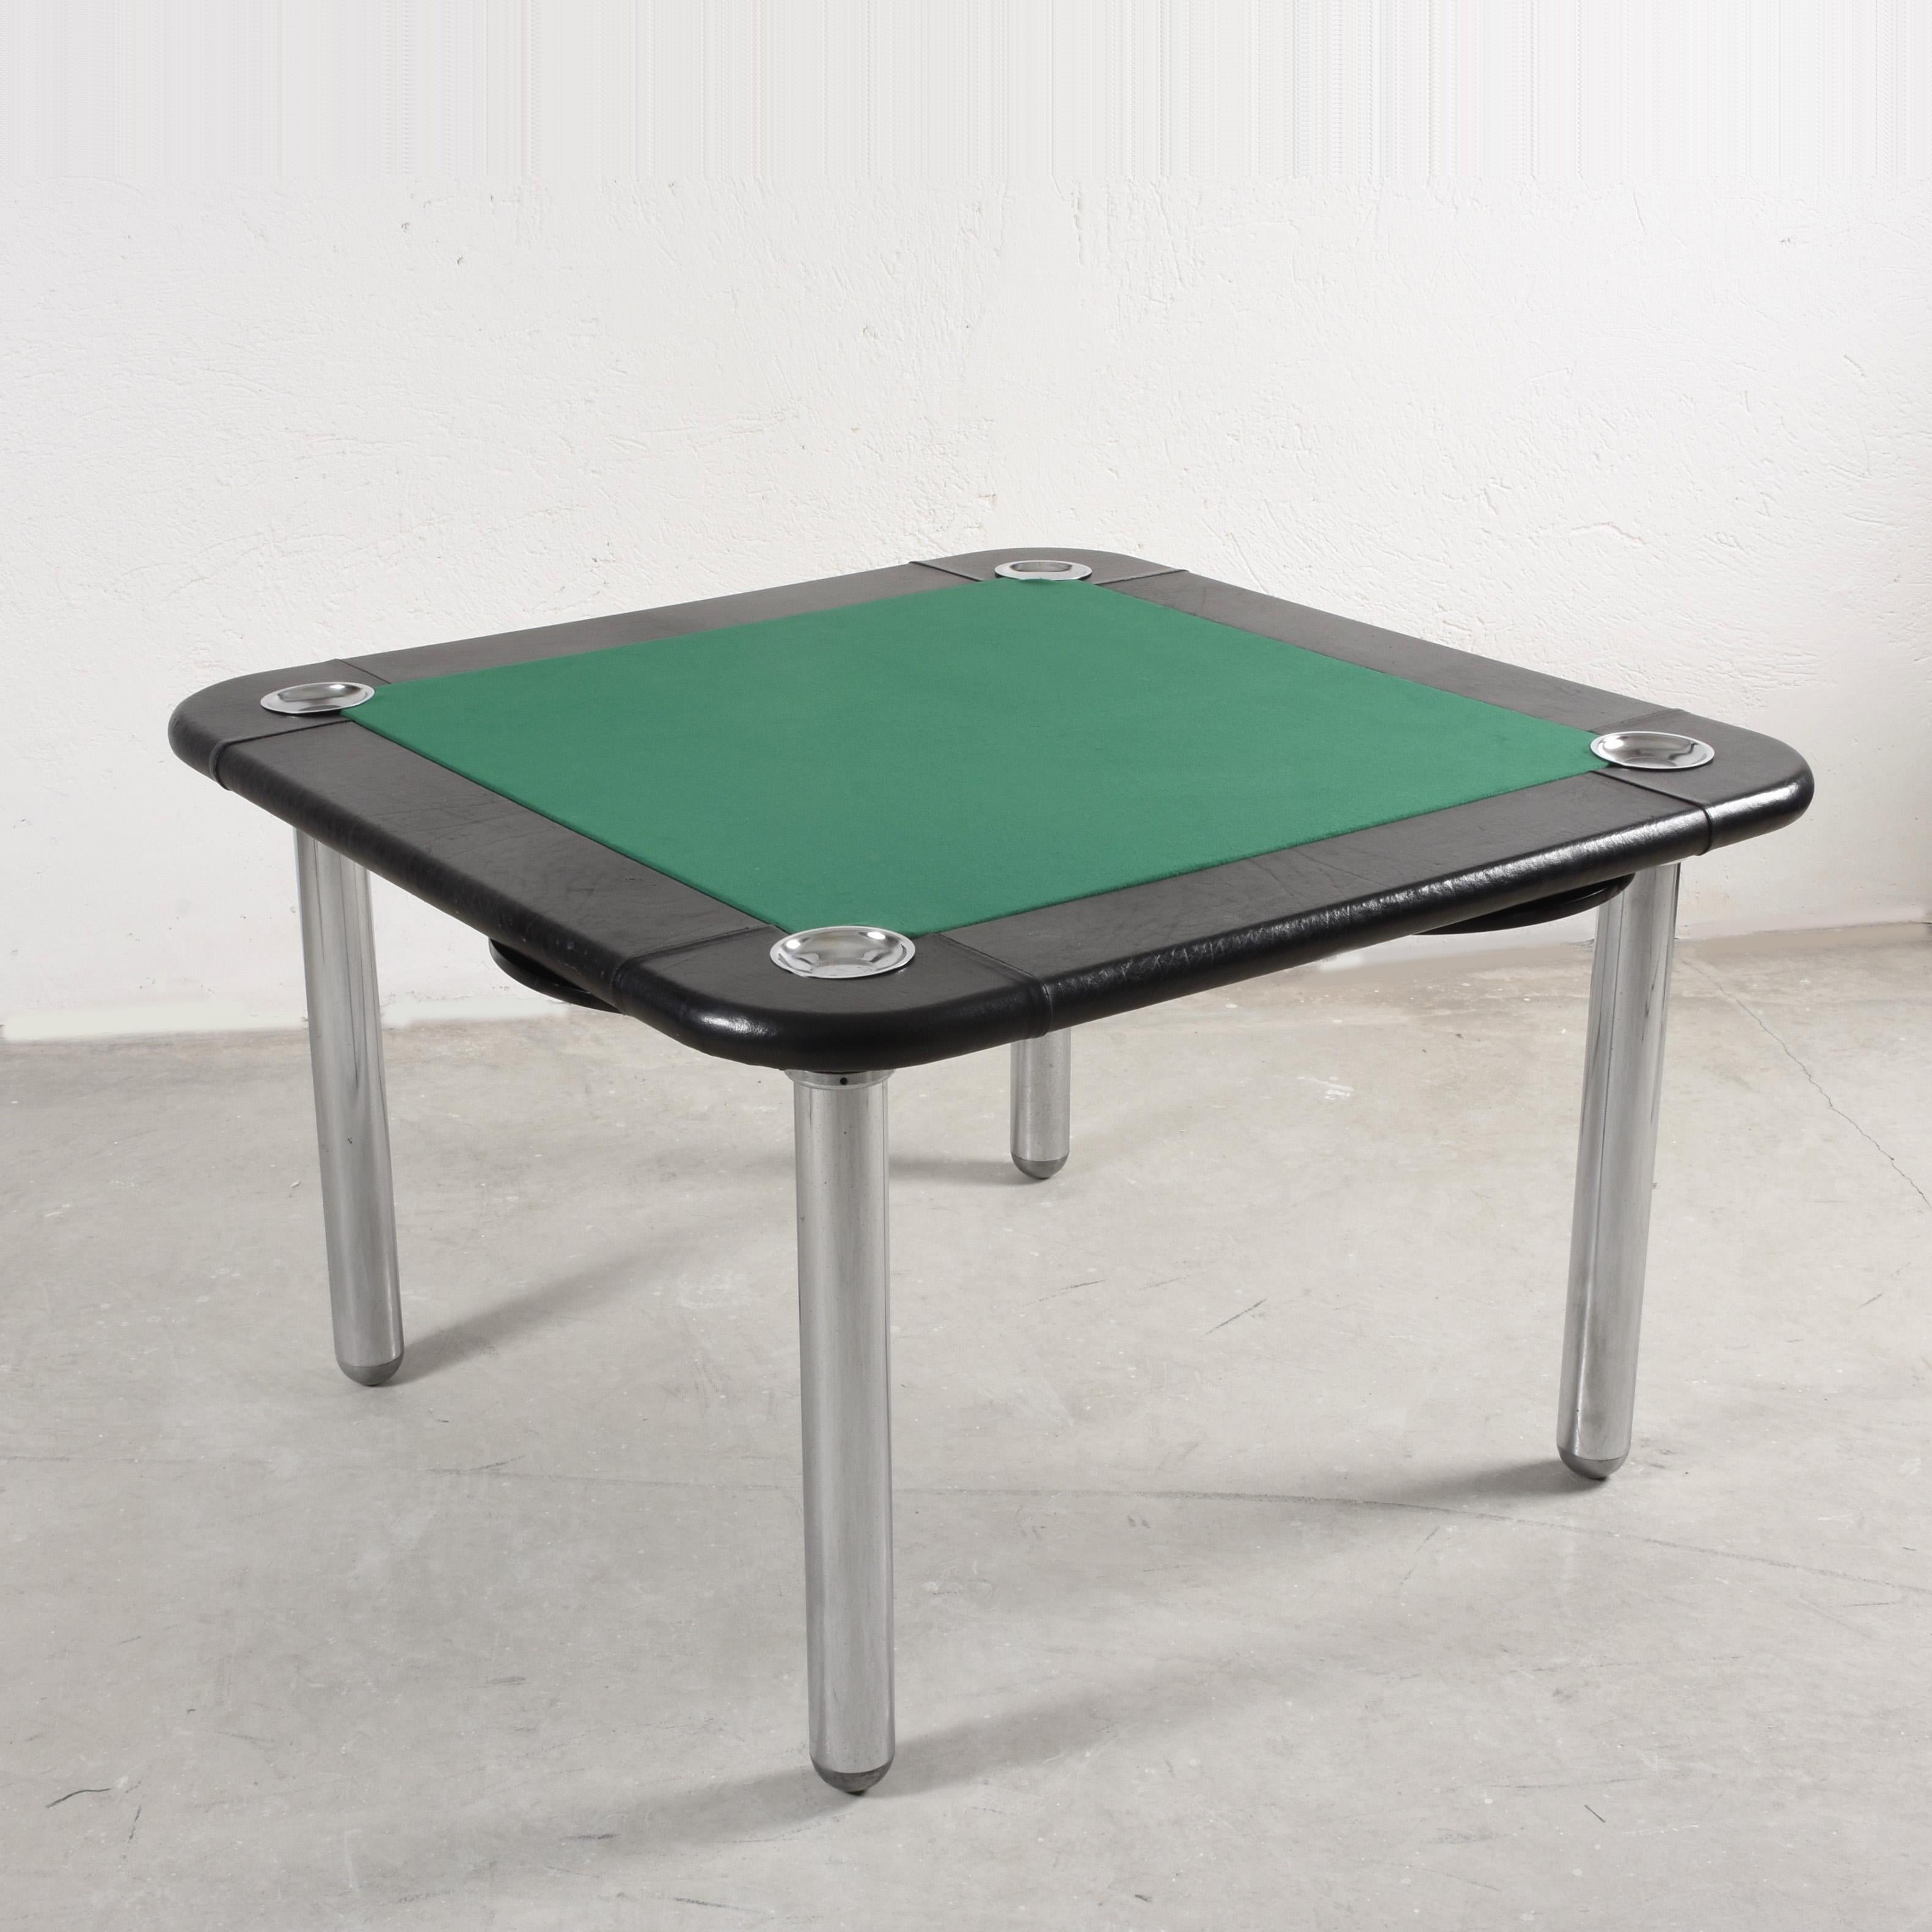 Italian Game Table in Leather and Chromed Steel, Attributable to Zanotta, Italy, 1960s